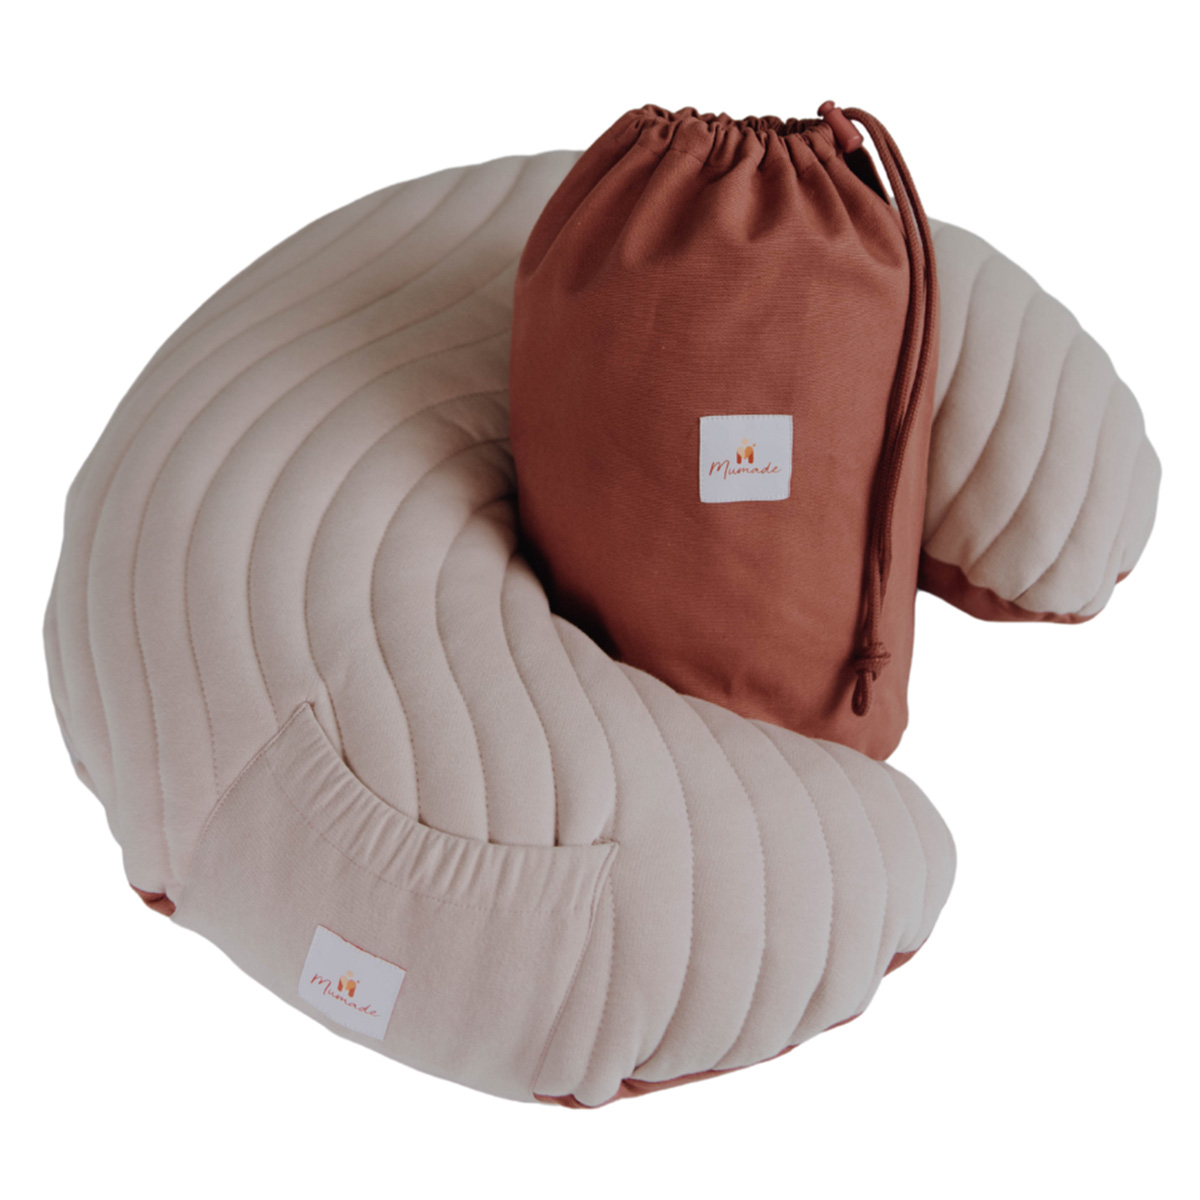 Coussin d'Allaitement Gonflable Liberty - Terracotta (Mumade) - Image 1